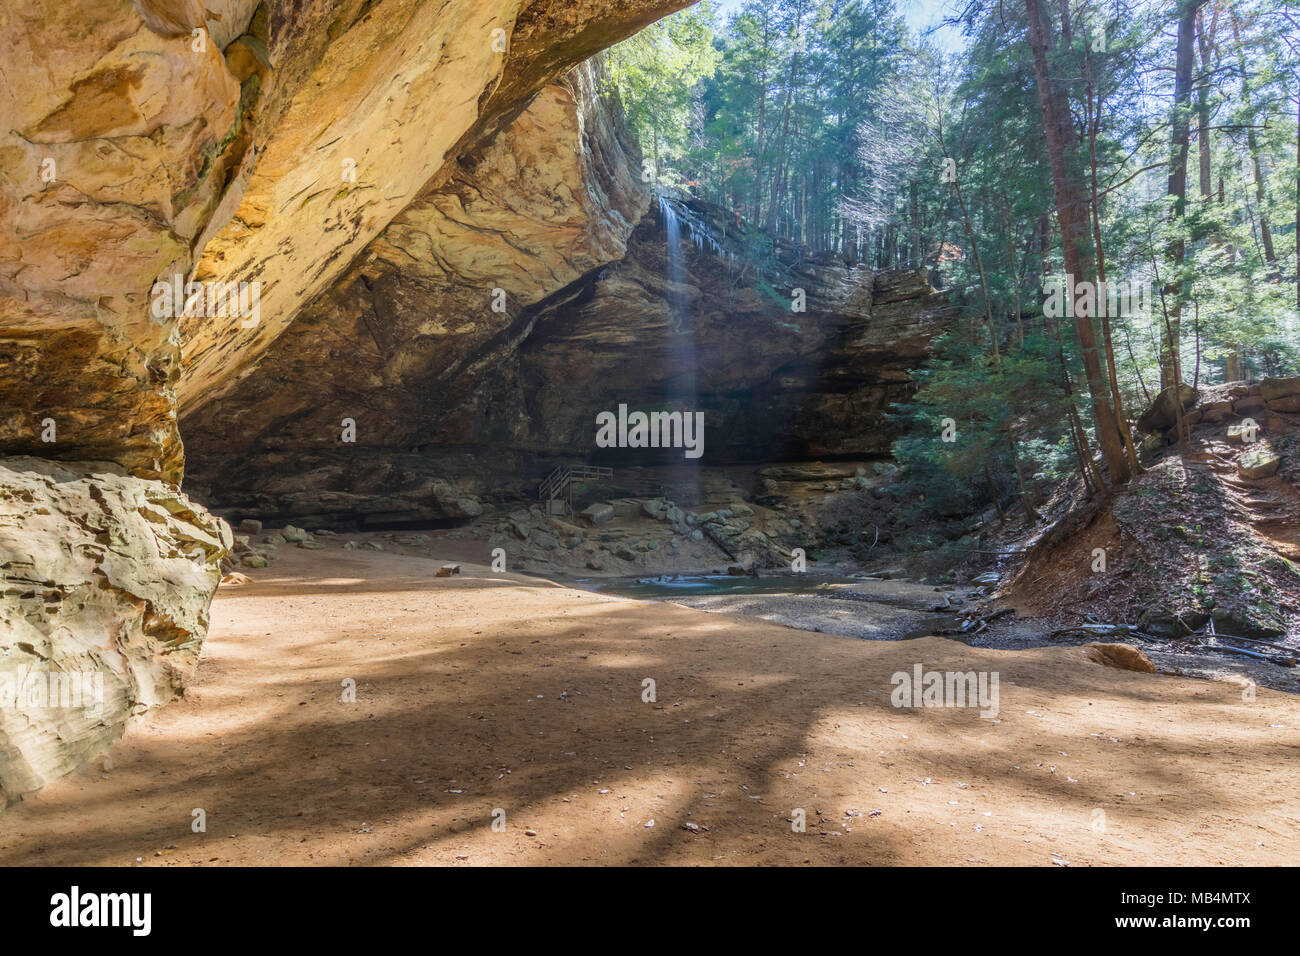 Ash Cave In Hocking Hills State Park. Stock Photo